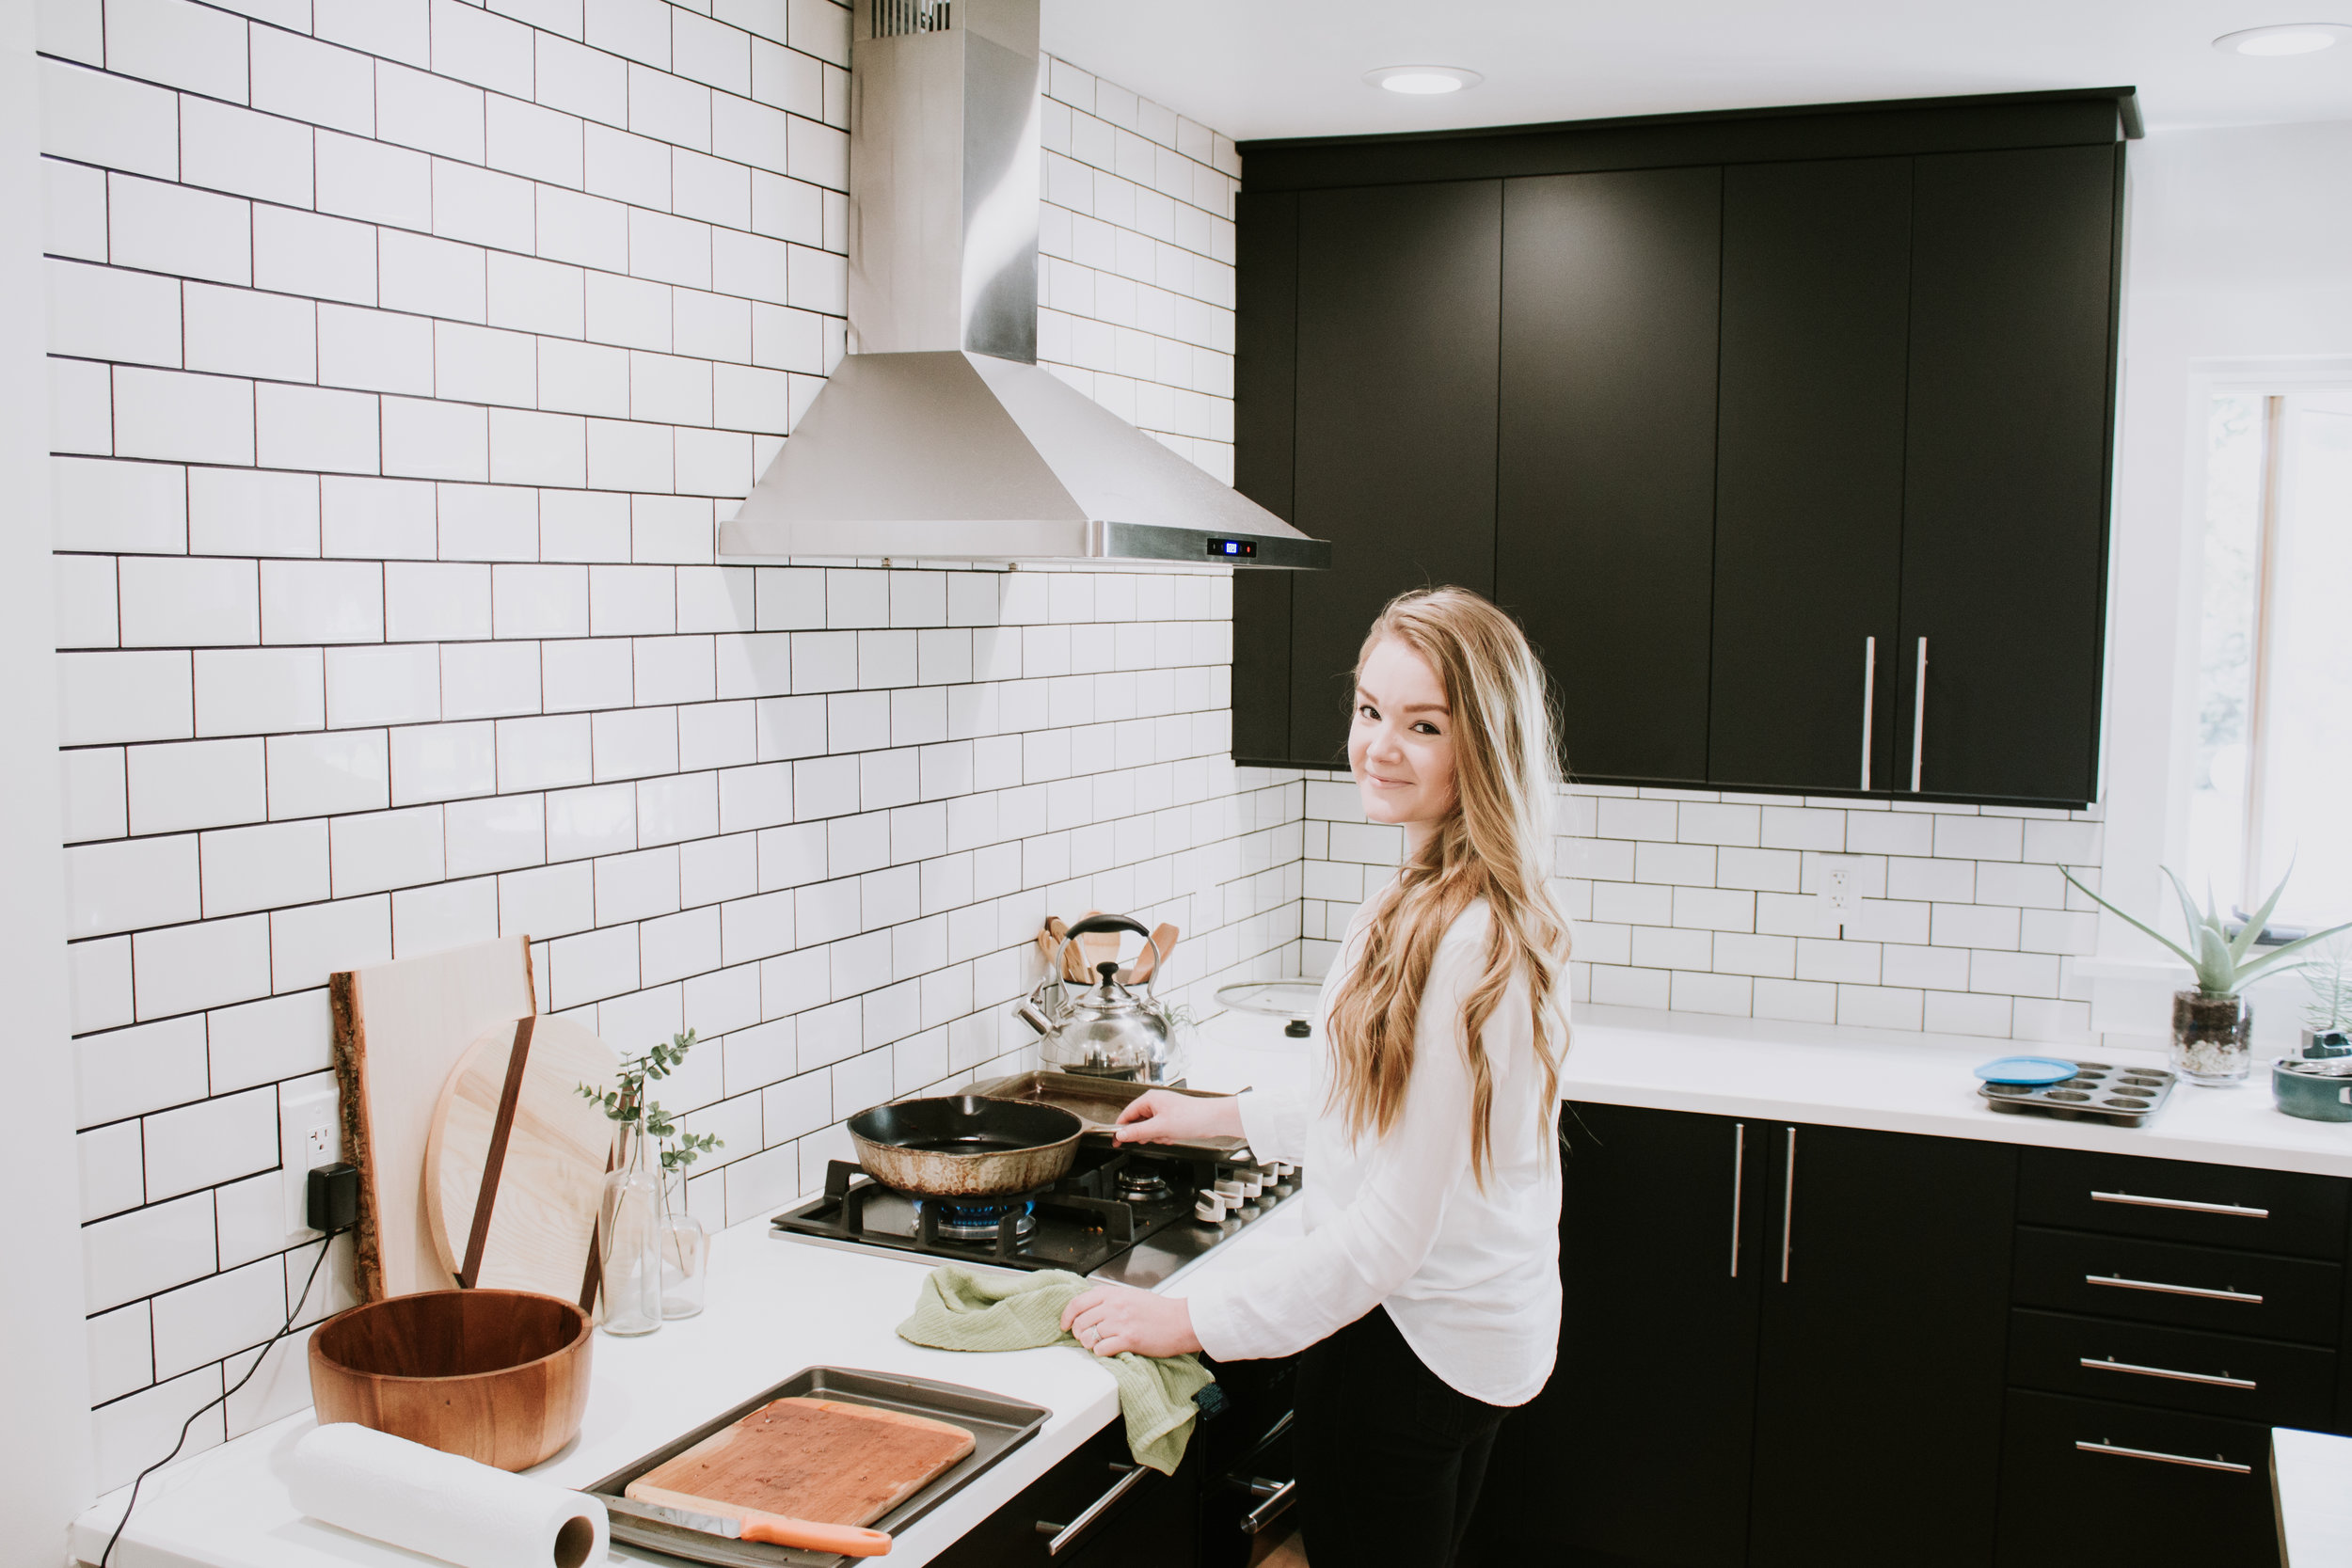 2018 in Review - What happened in our lives in 2018 - the behind the scenes of Refined Design - Our kitchen was featured on Apartment Therapy!